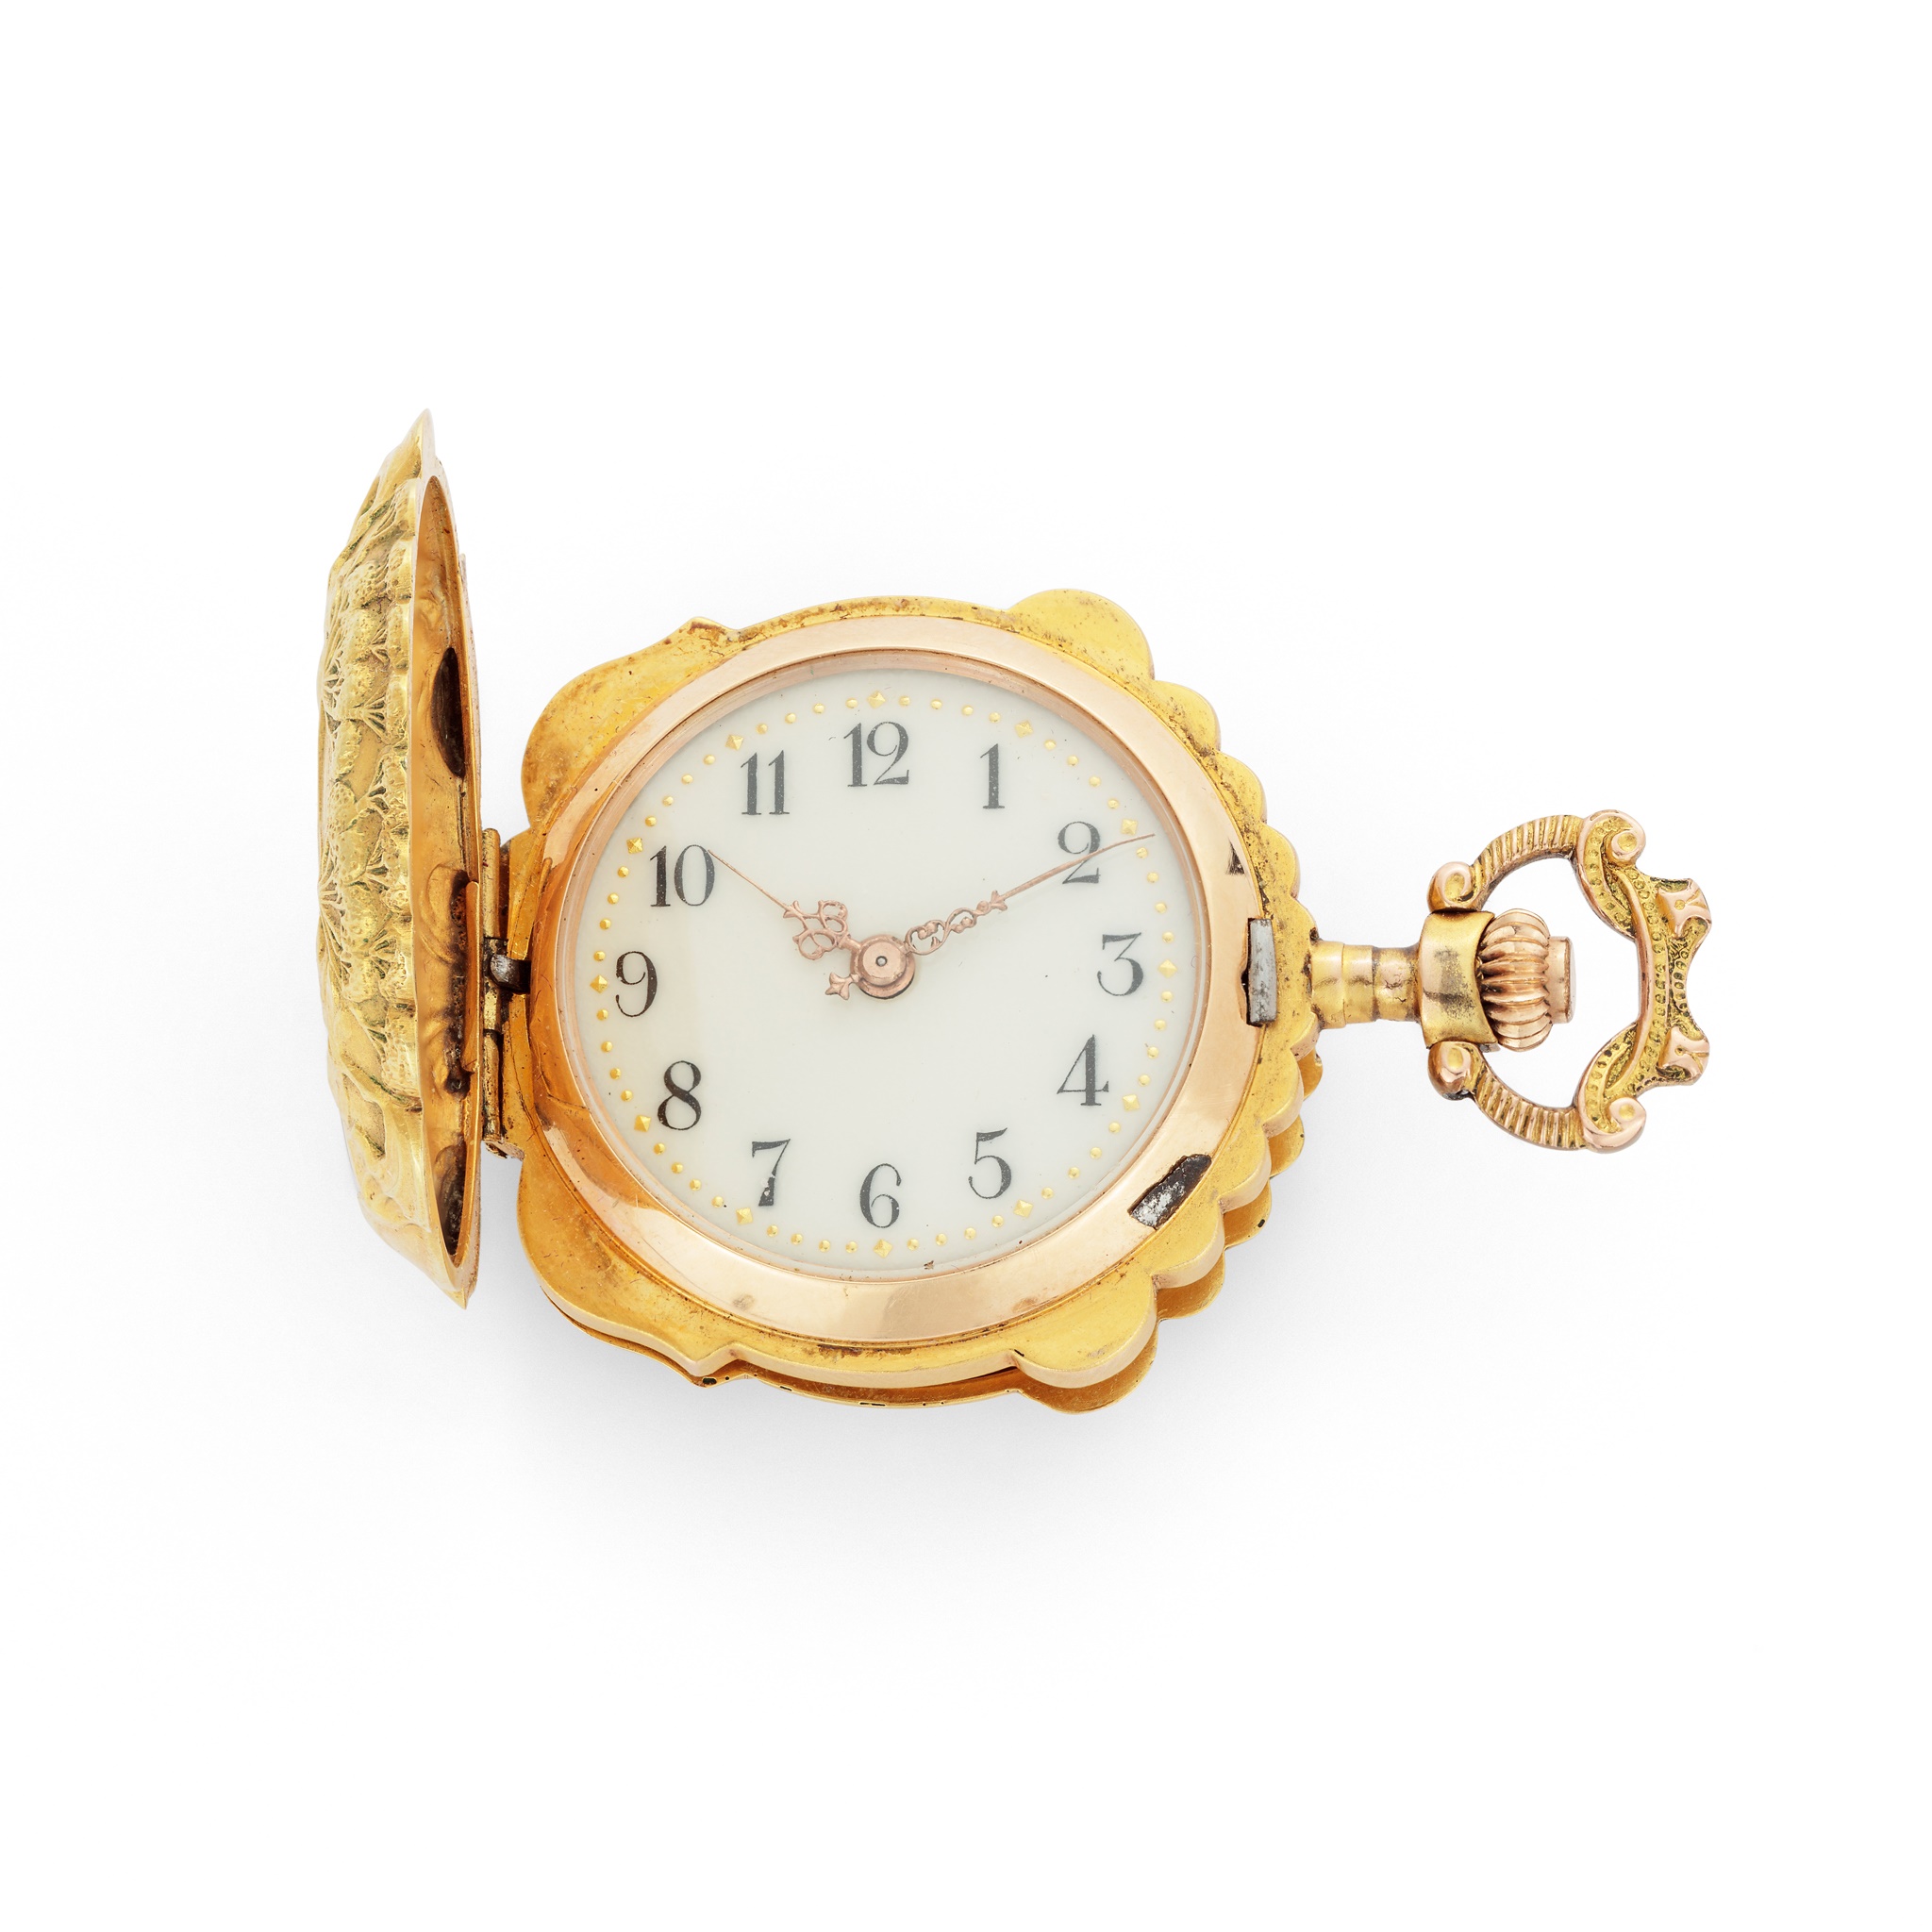 An Art Nouveau enamel pocket watch, circa 1900 With gold case, full hunter form, keyless wind, - Image 3 of 3